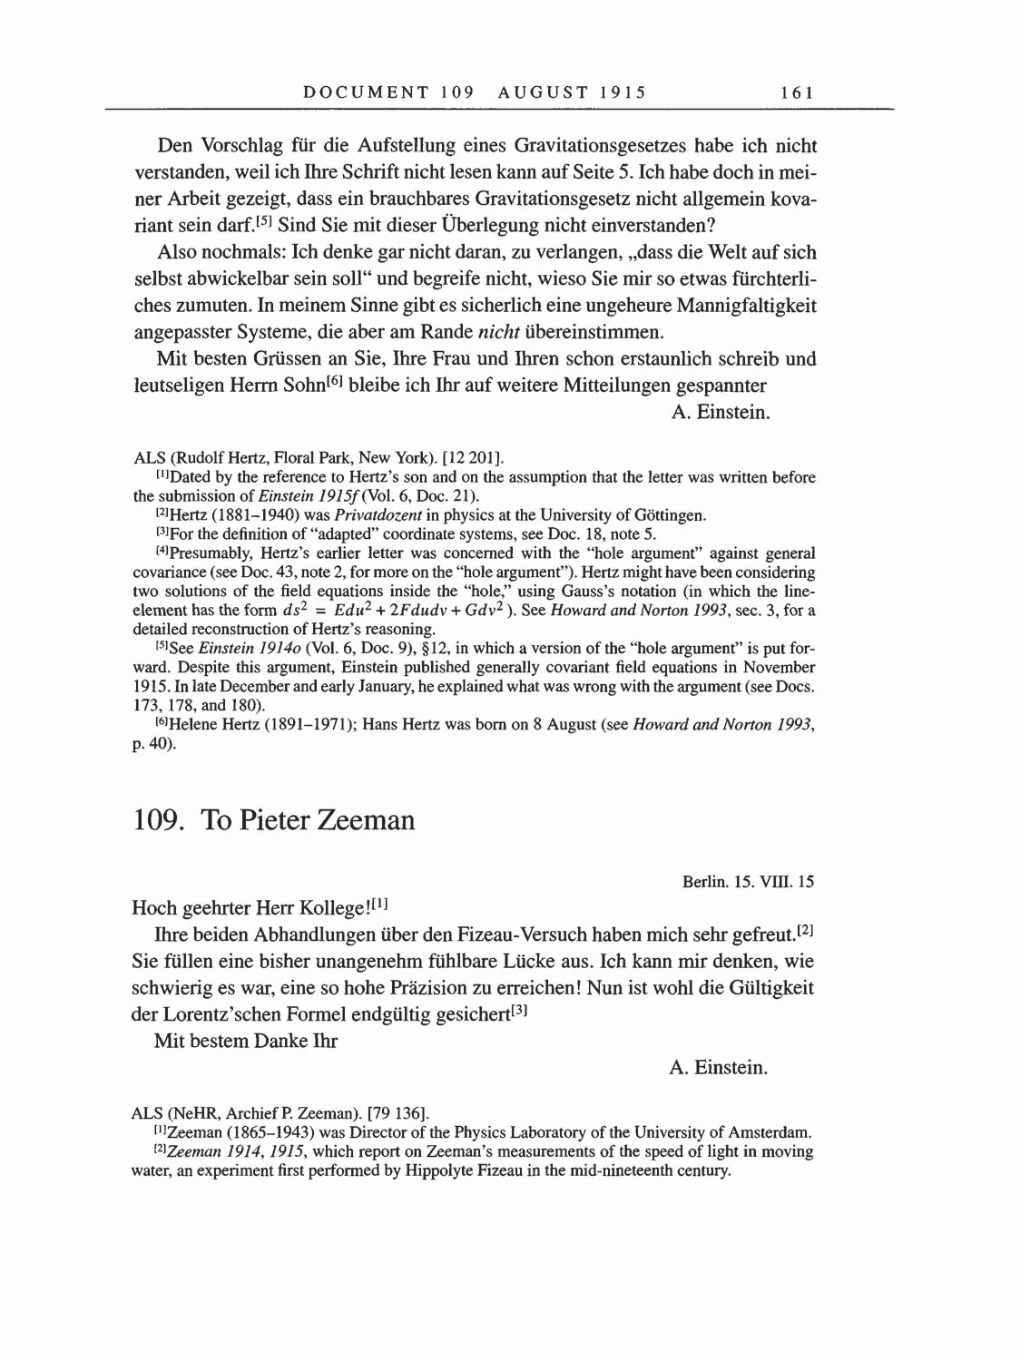 Volume 8, Part A: The Berlin Years: Correspondence 1914-1917 page 161